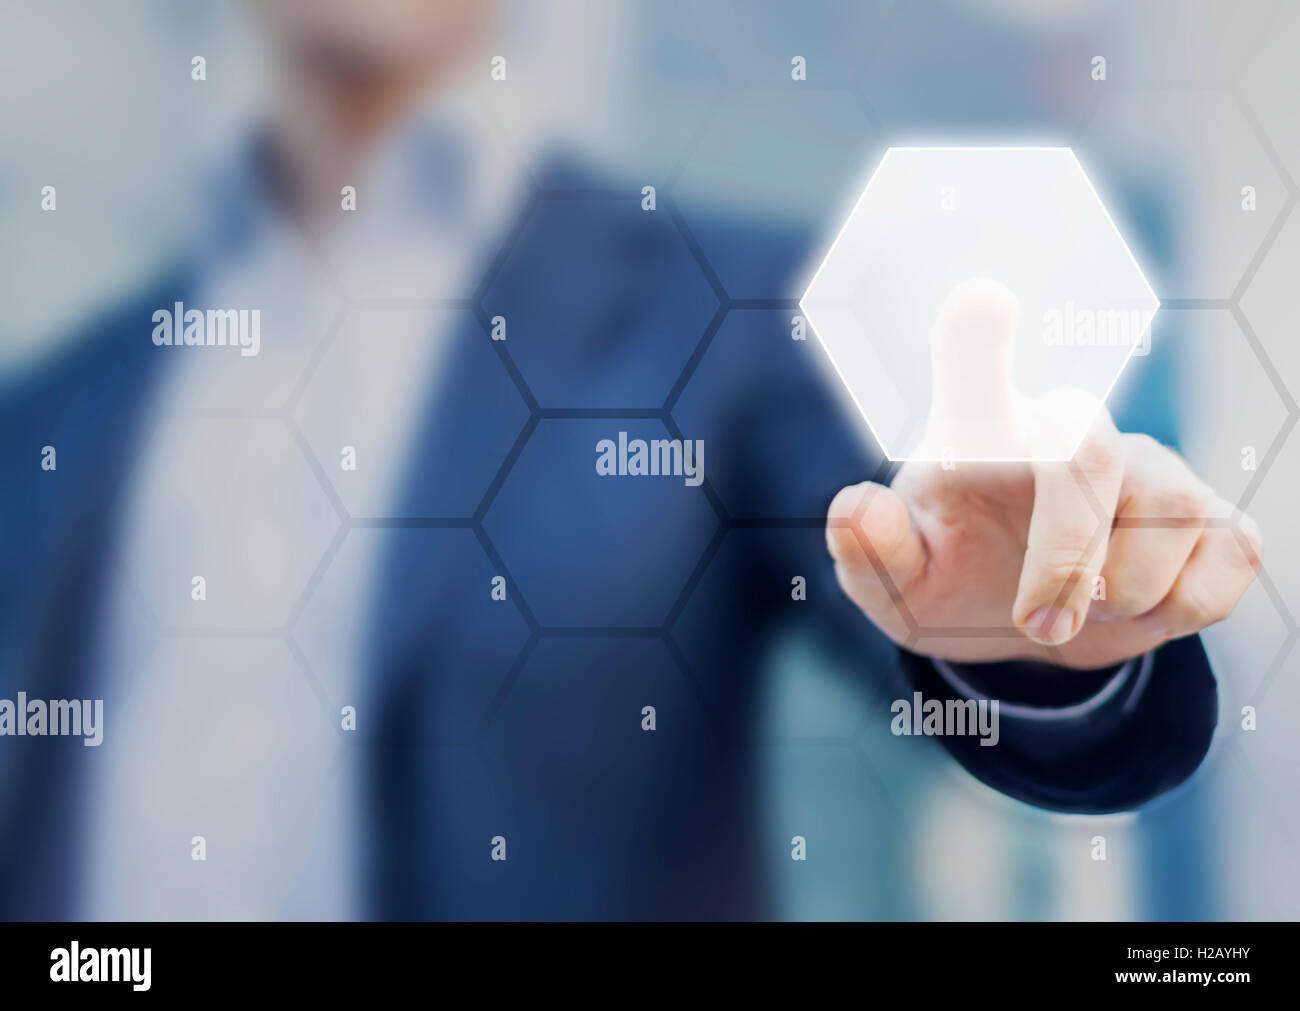 Person touching an hexagonal button on a digital interface. Concept about technology and choices Stock Photo